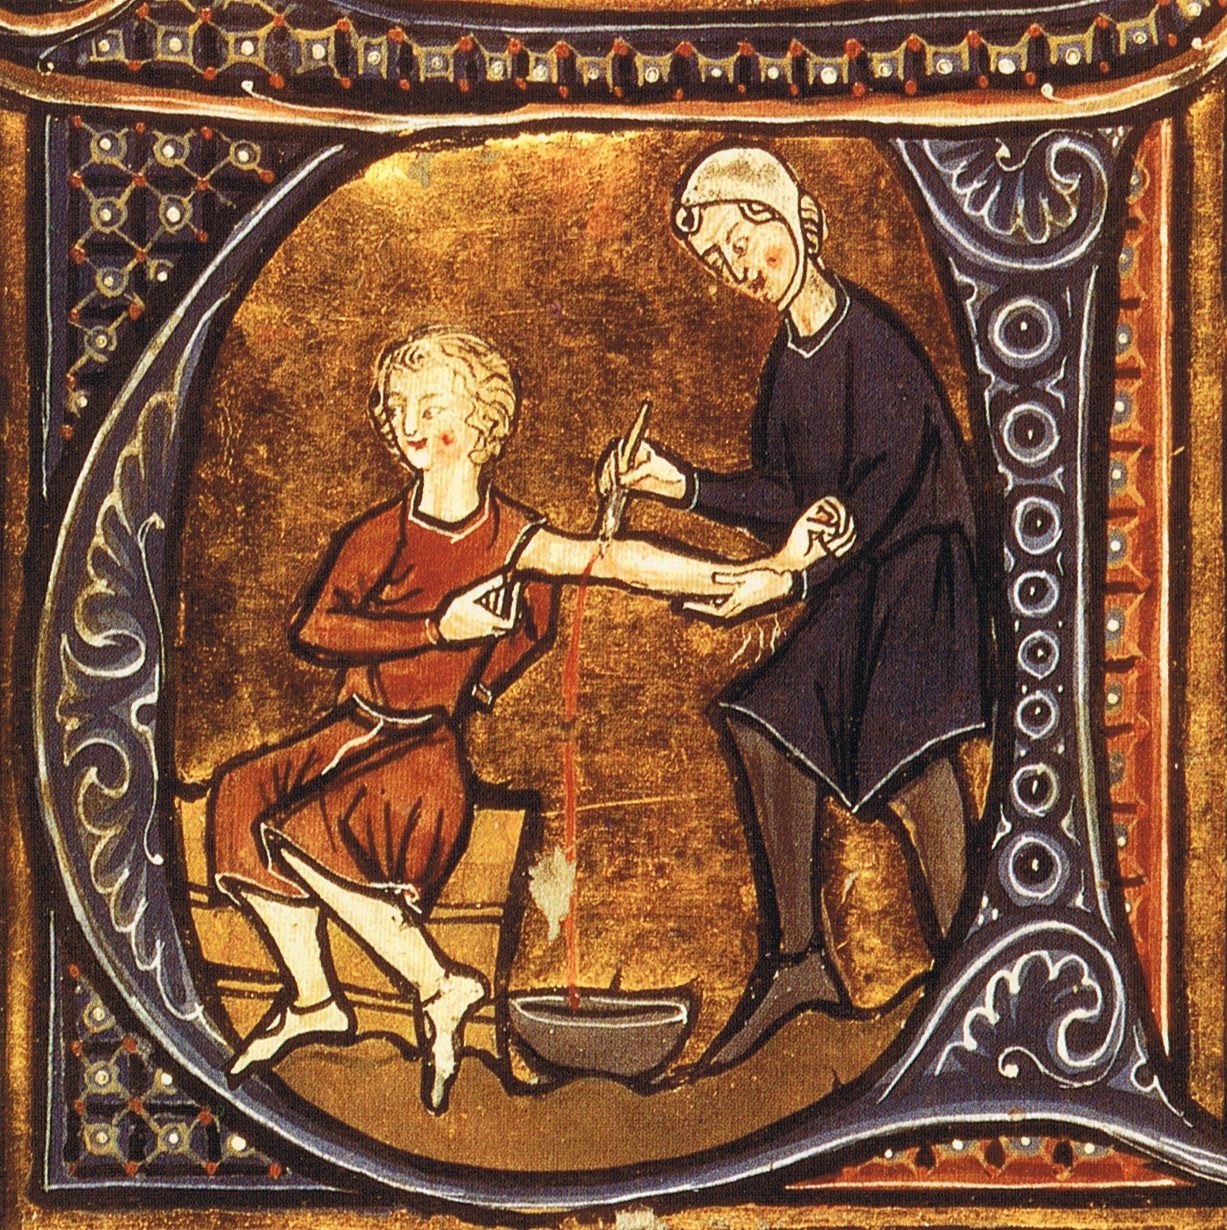 An illustration of the medieval practice of blood letting A woman is cutting into the arm of another woman using a knife. Blood is running down into a bowl in a stream of red.